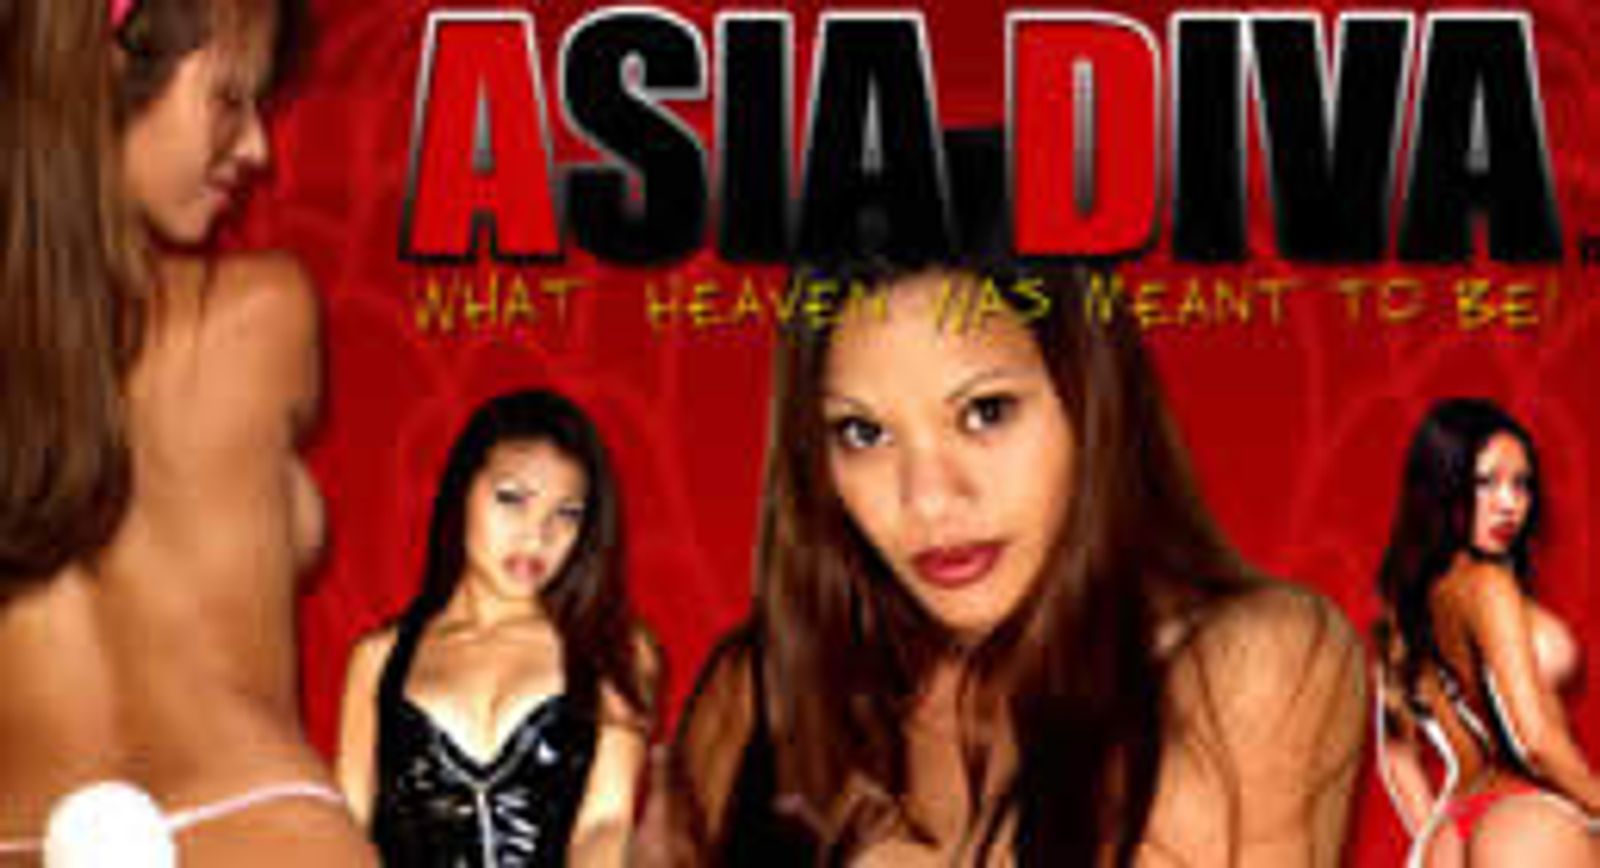 For Asian Beauty, It's AsiaDiva.com